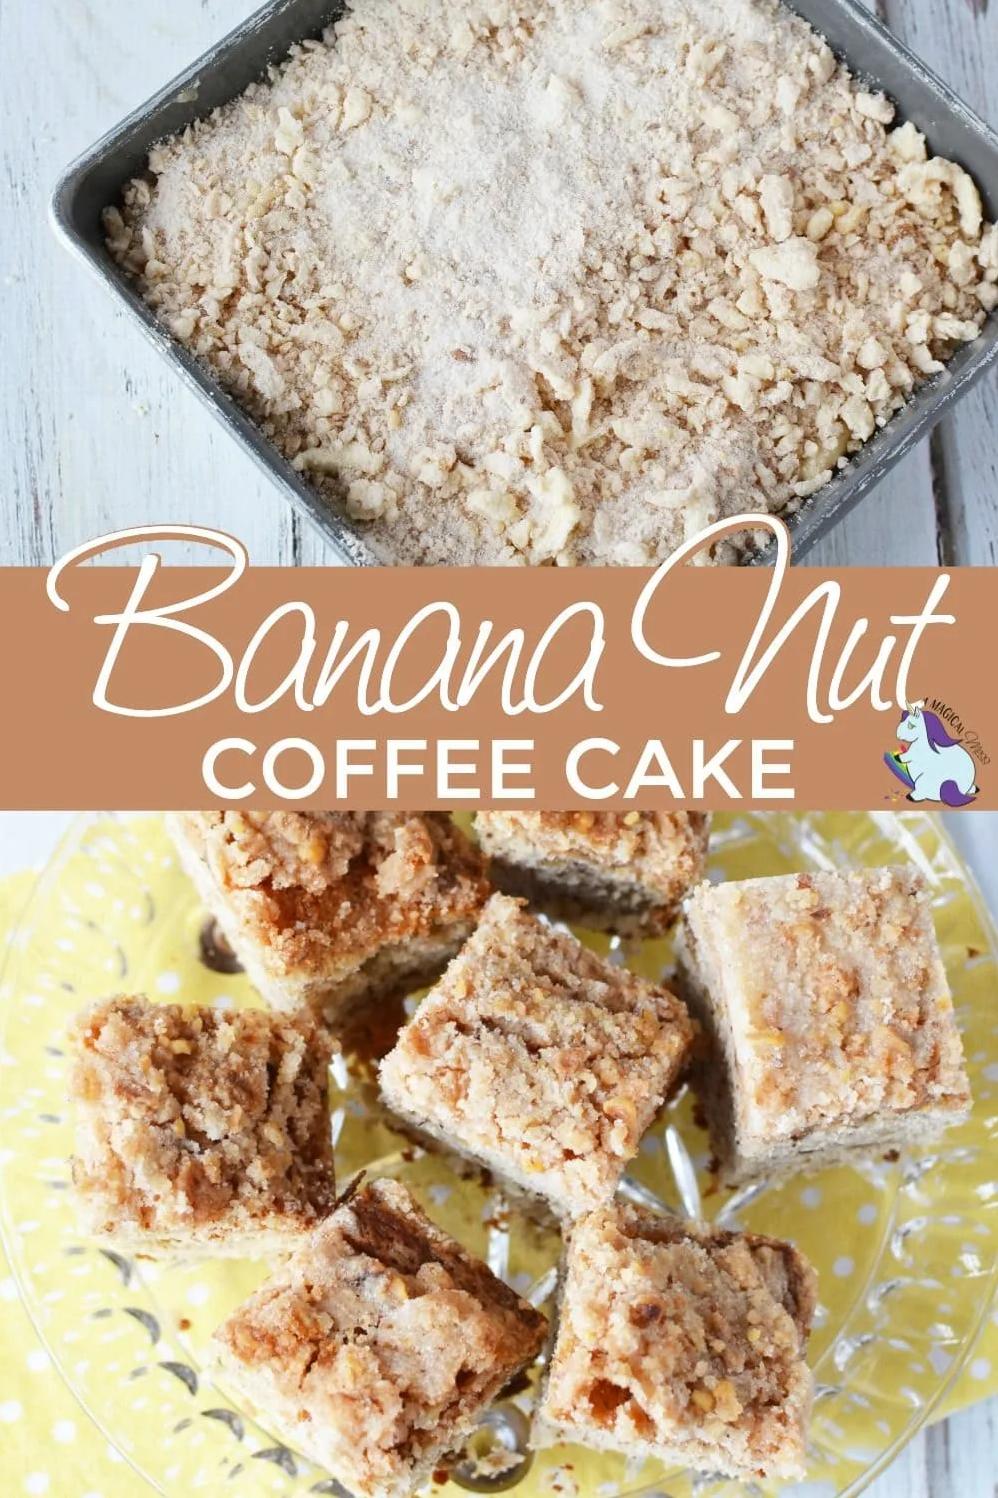  Nutty and sweet, this banana nut coffee cake is the perfect snack.